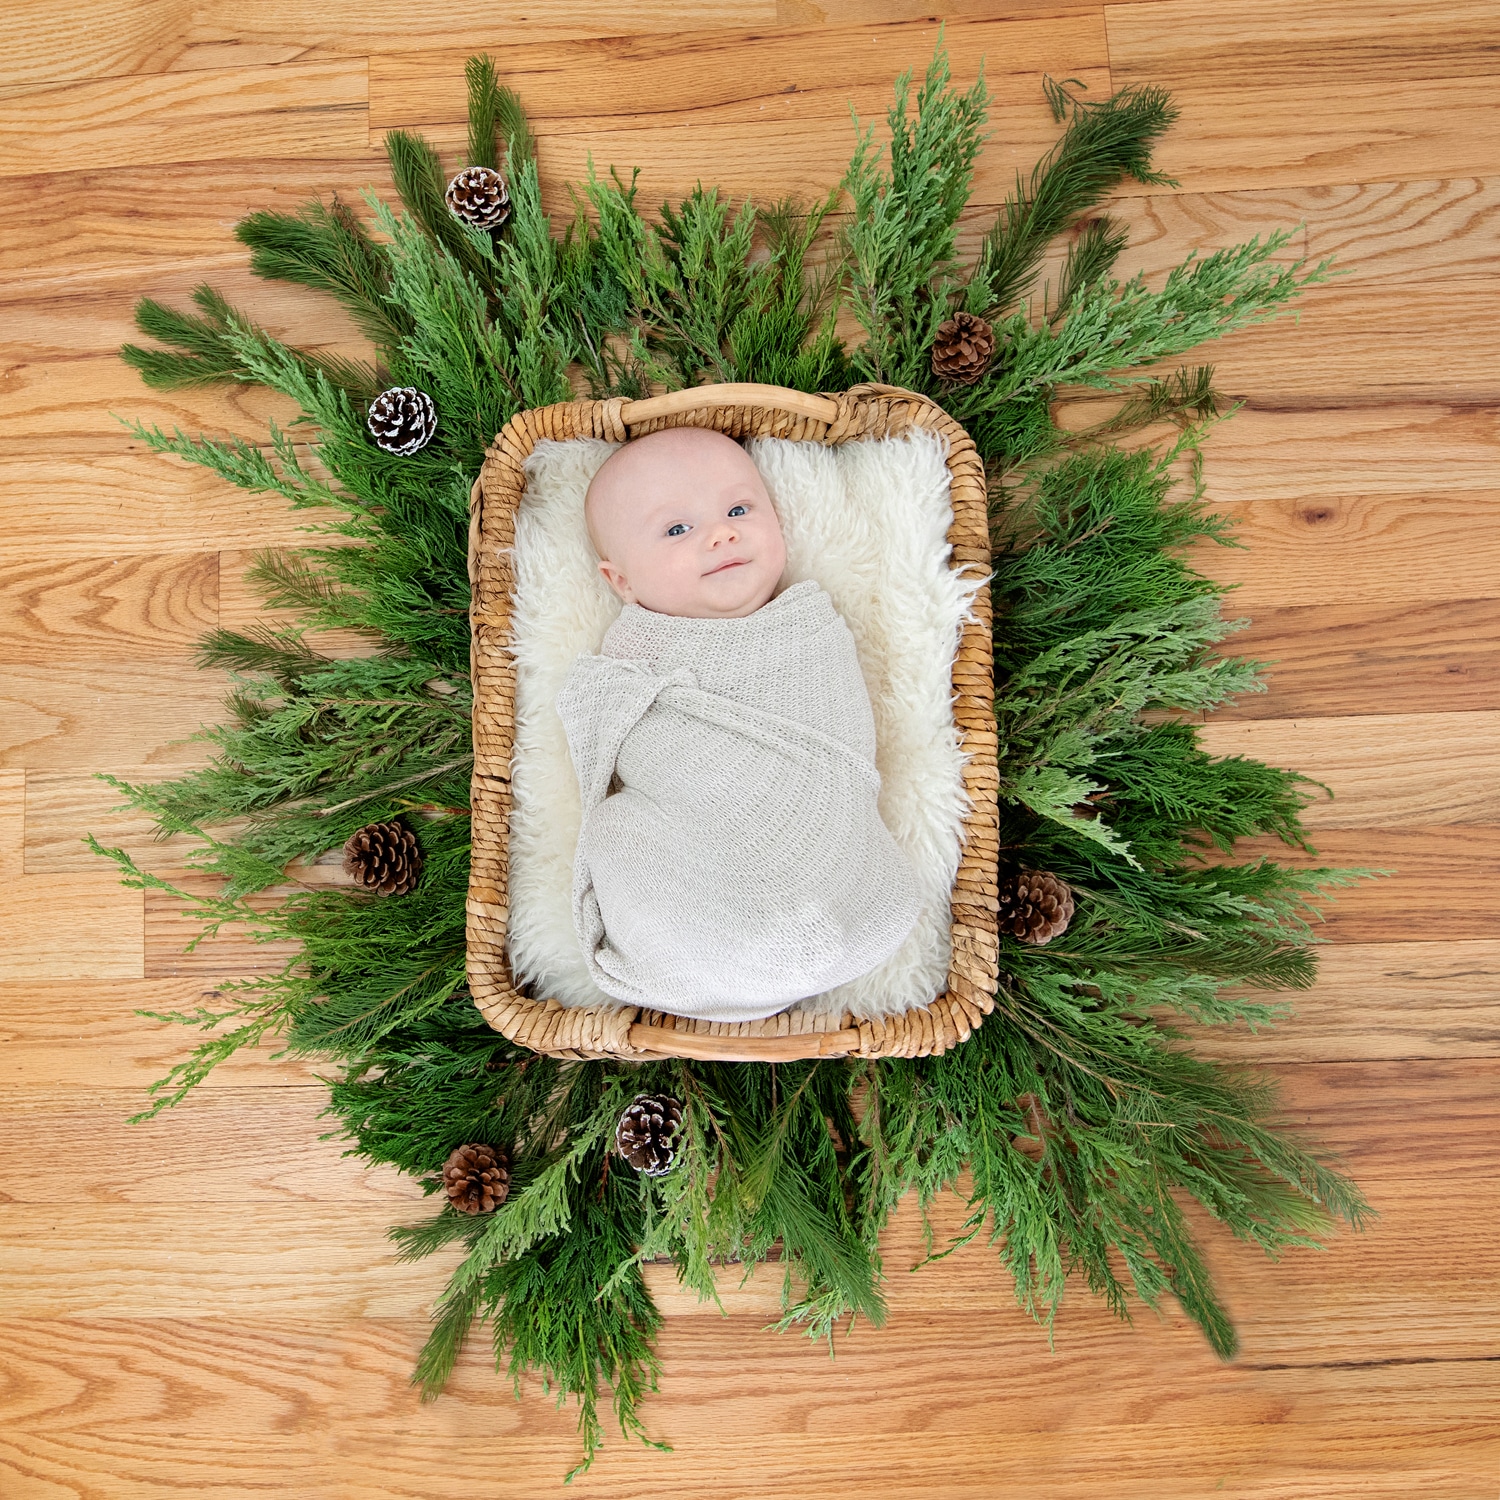 A baby in a basket among pine branches.